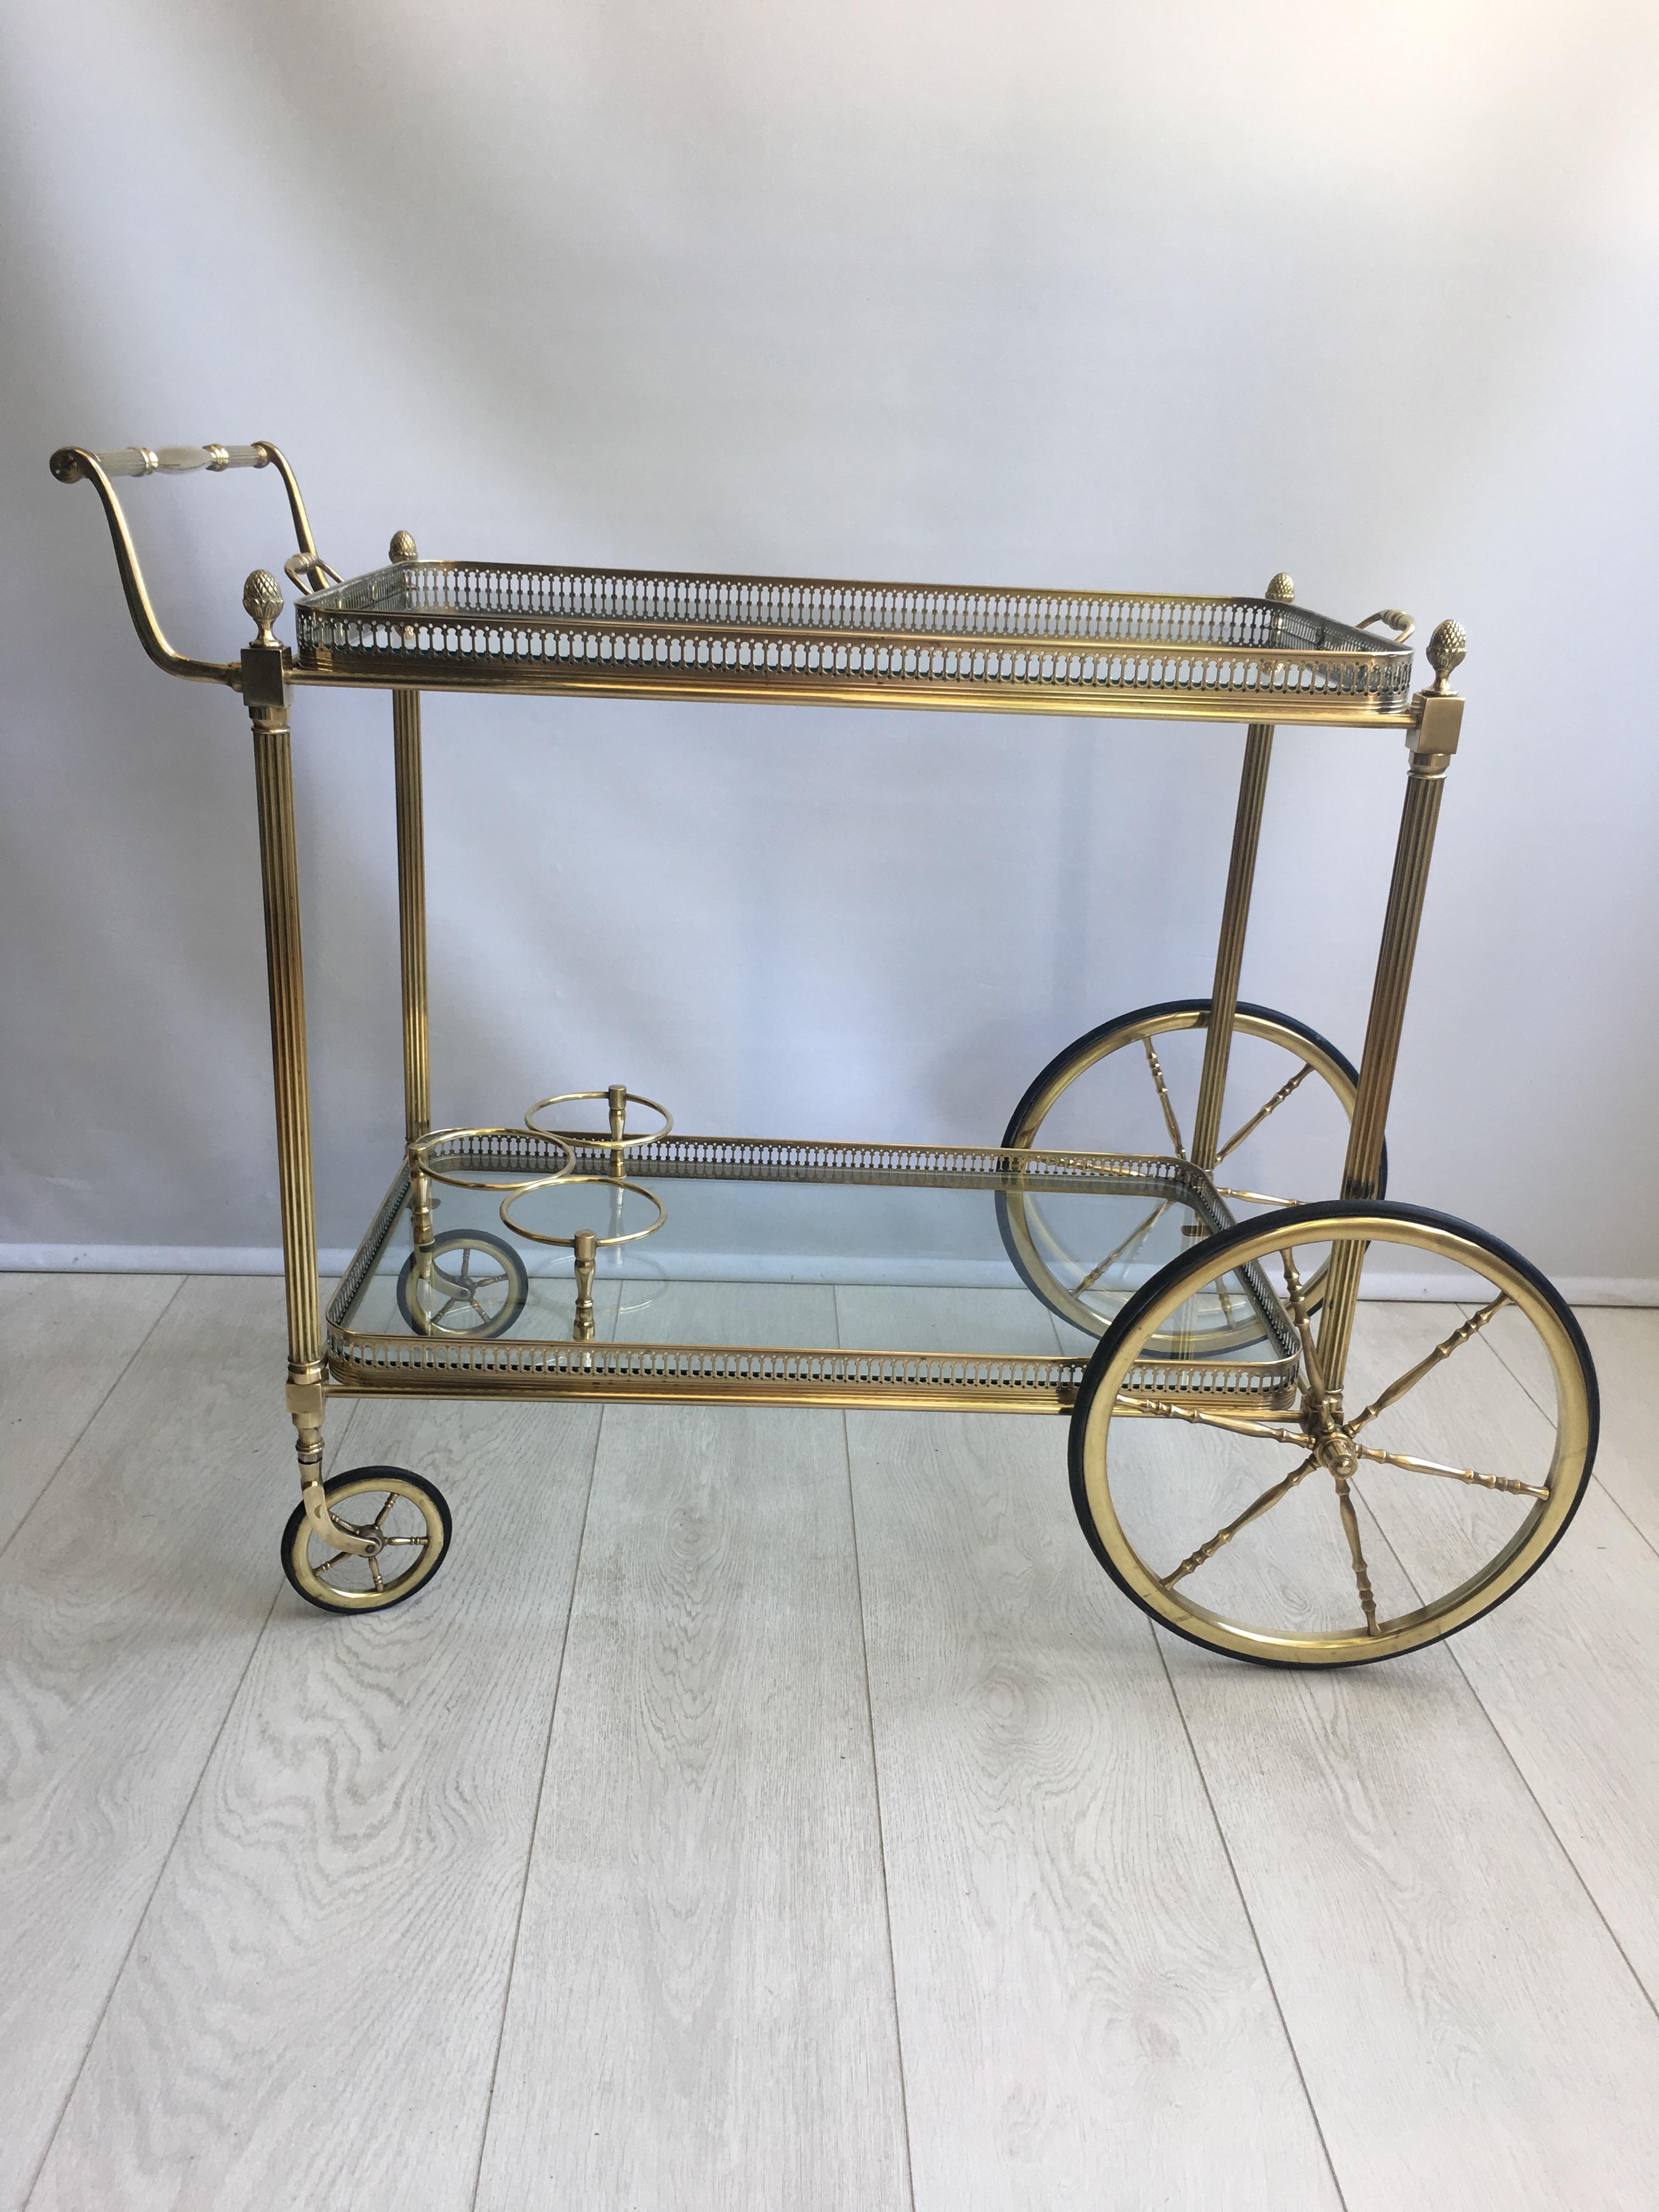 Classic French brass drinks trolley, circa 1950.

Great quality with polished brass frame and bottle holder to lower tier

Lift off tray measures 62.5 cm wide, 36.5 cm deep and stands 62 cm to glass.
Overall dims 85 cm wide, 48 cm deep and 71